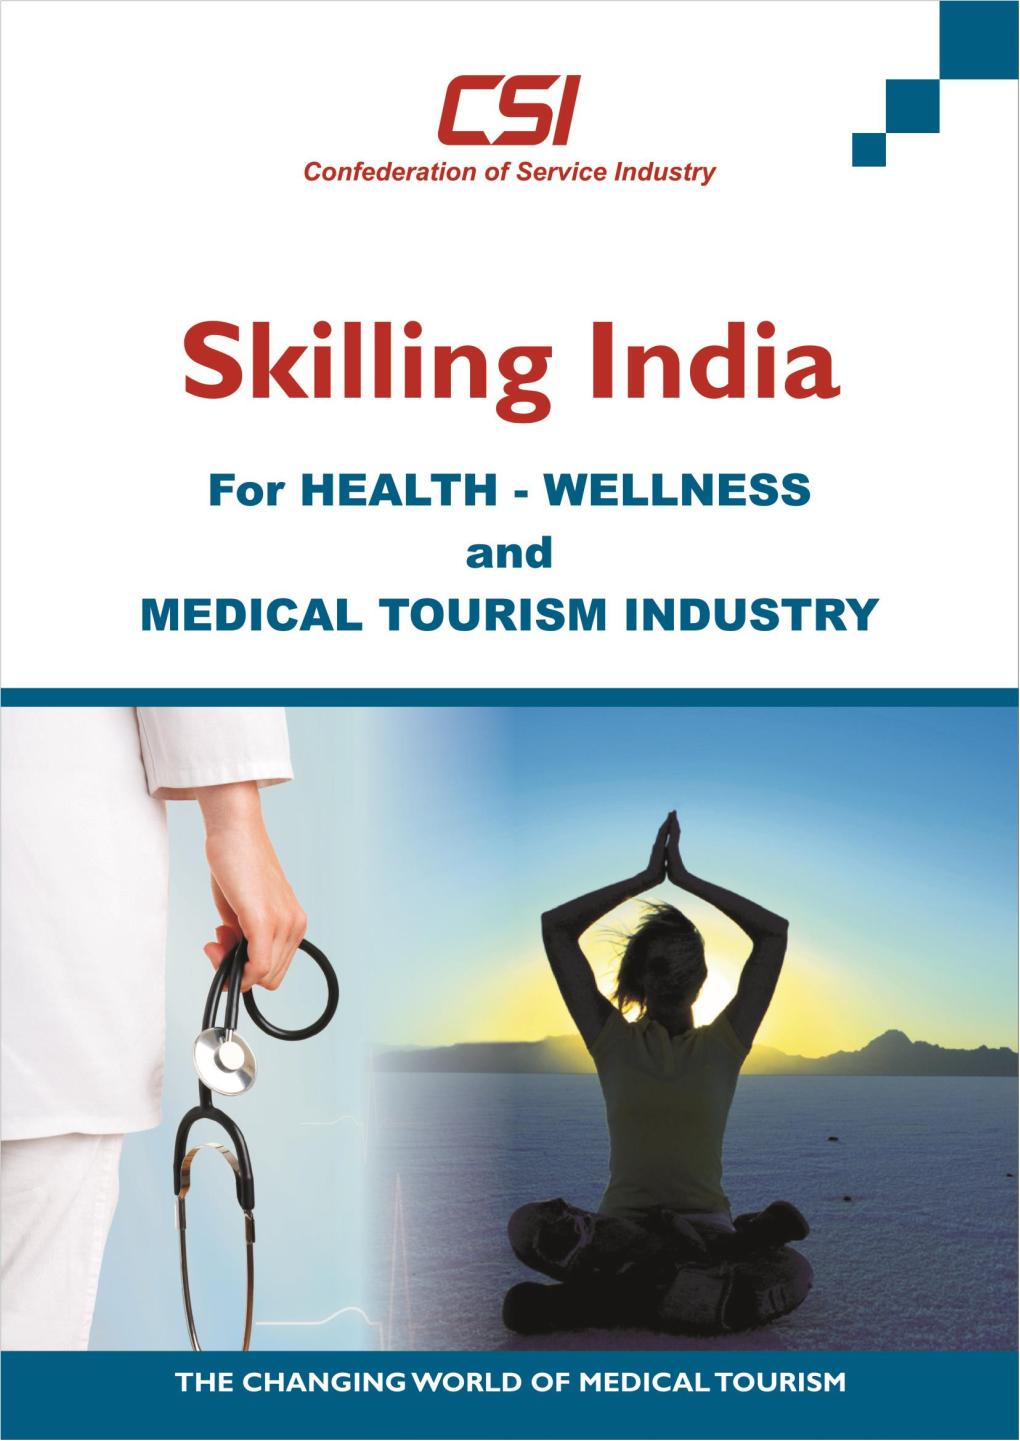 Stricter Visa Rules Driving Away Medical Tourism from India (15 August 2013)